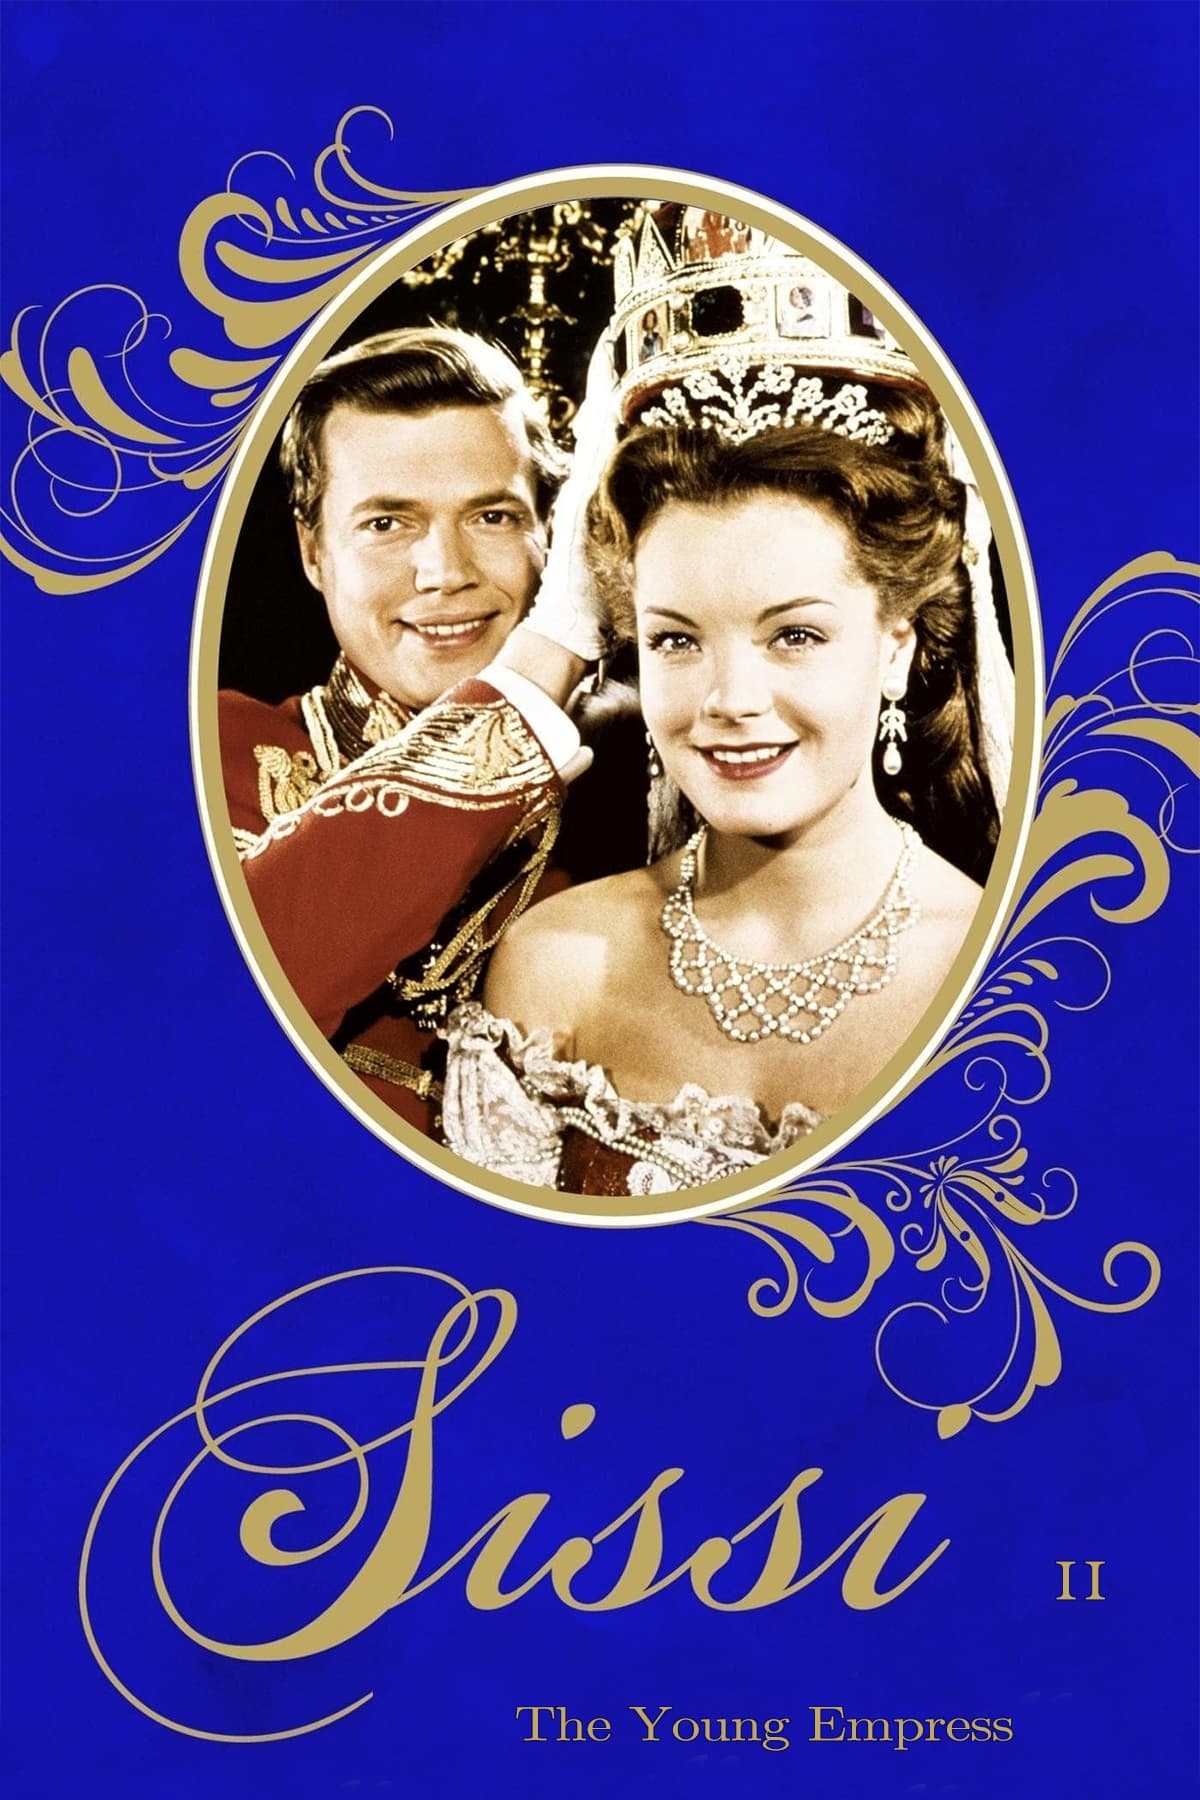 Sissi: The Young Empress (1956)